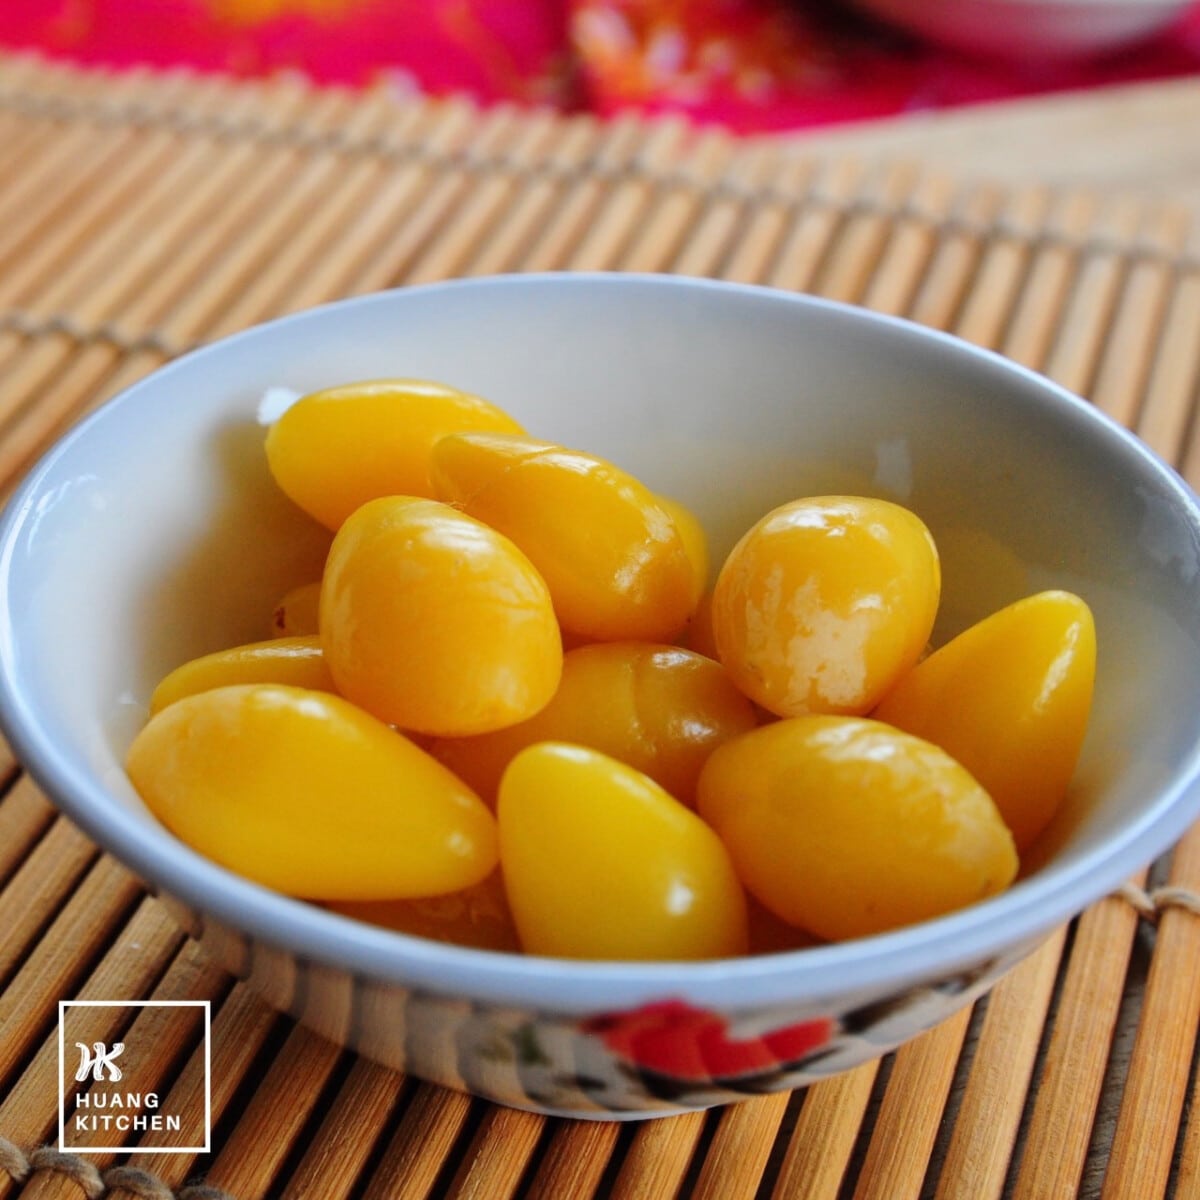 How To Prepare Gingko Nuts